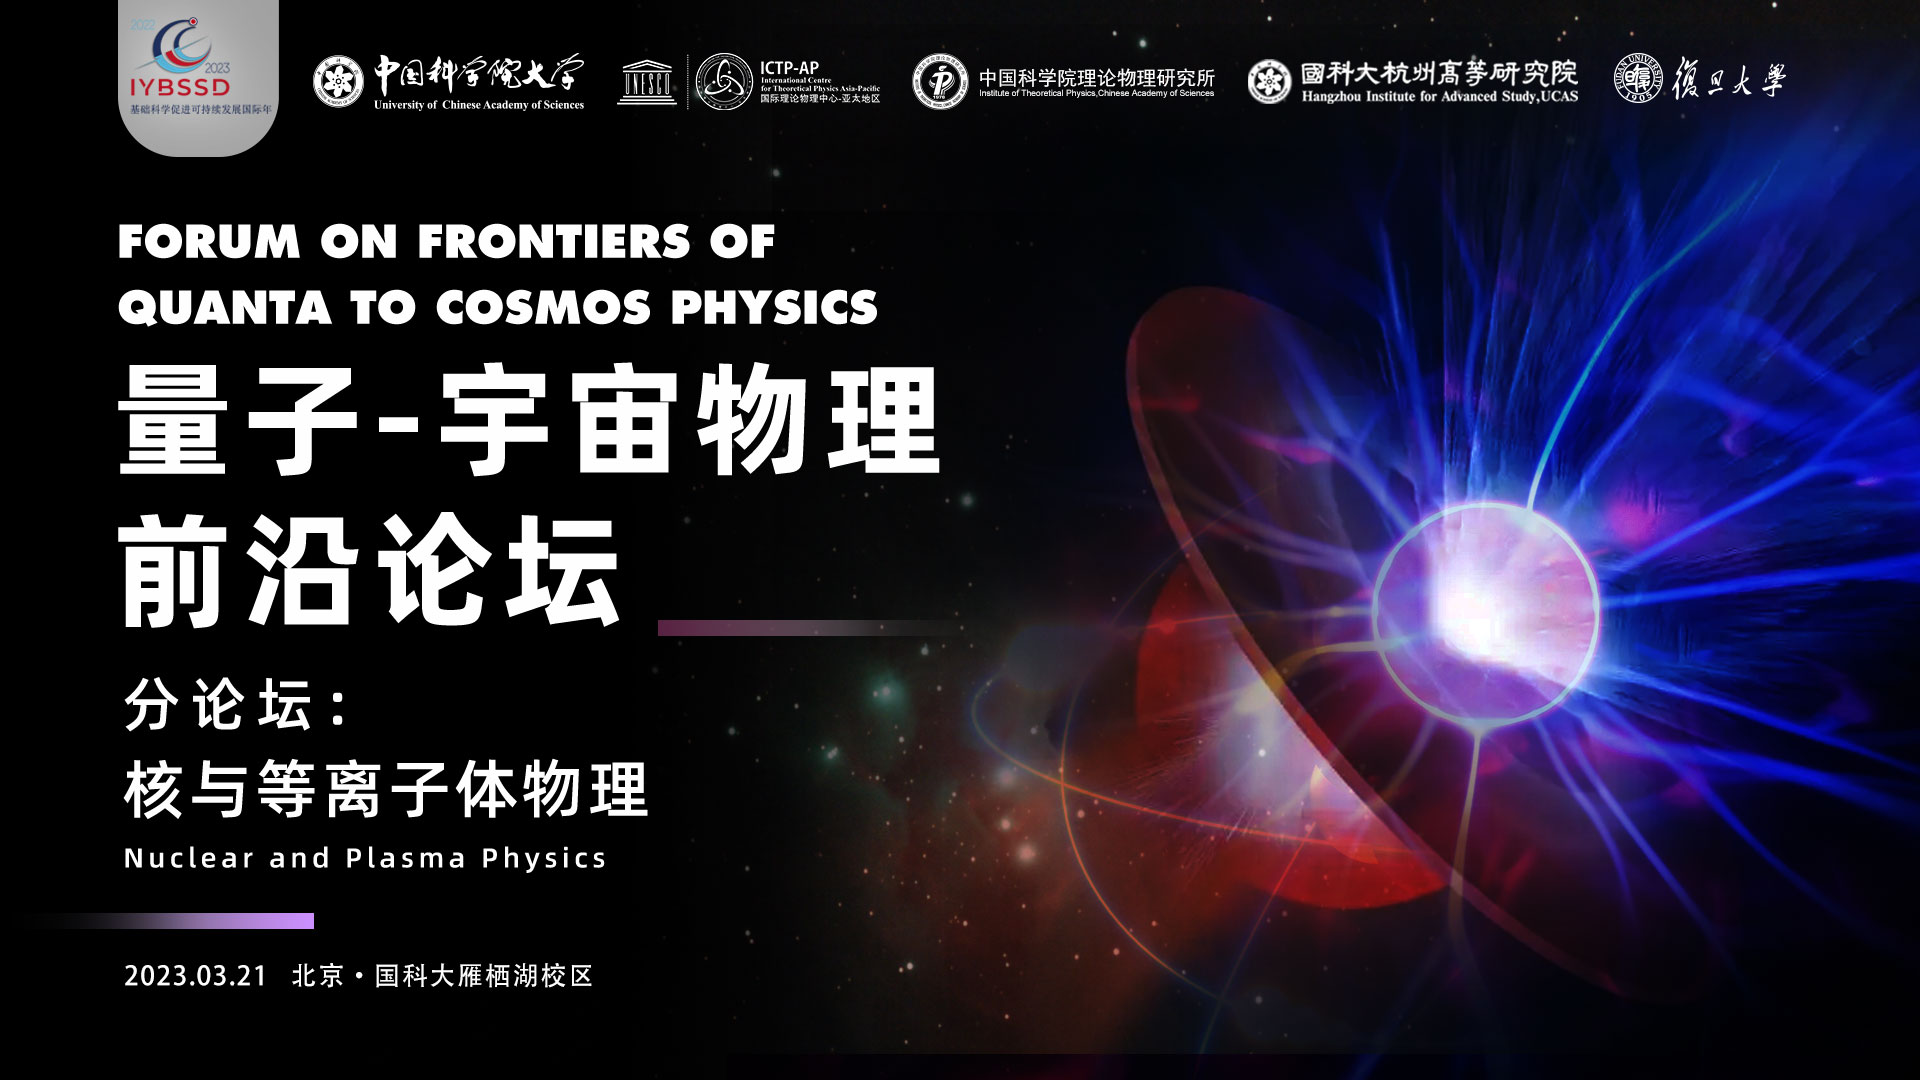 Nuclear and Plasma Physics--Forum on Frontiers of Quanta to Cosmos Physics